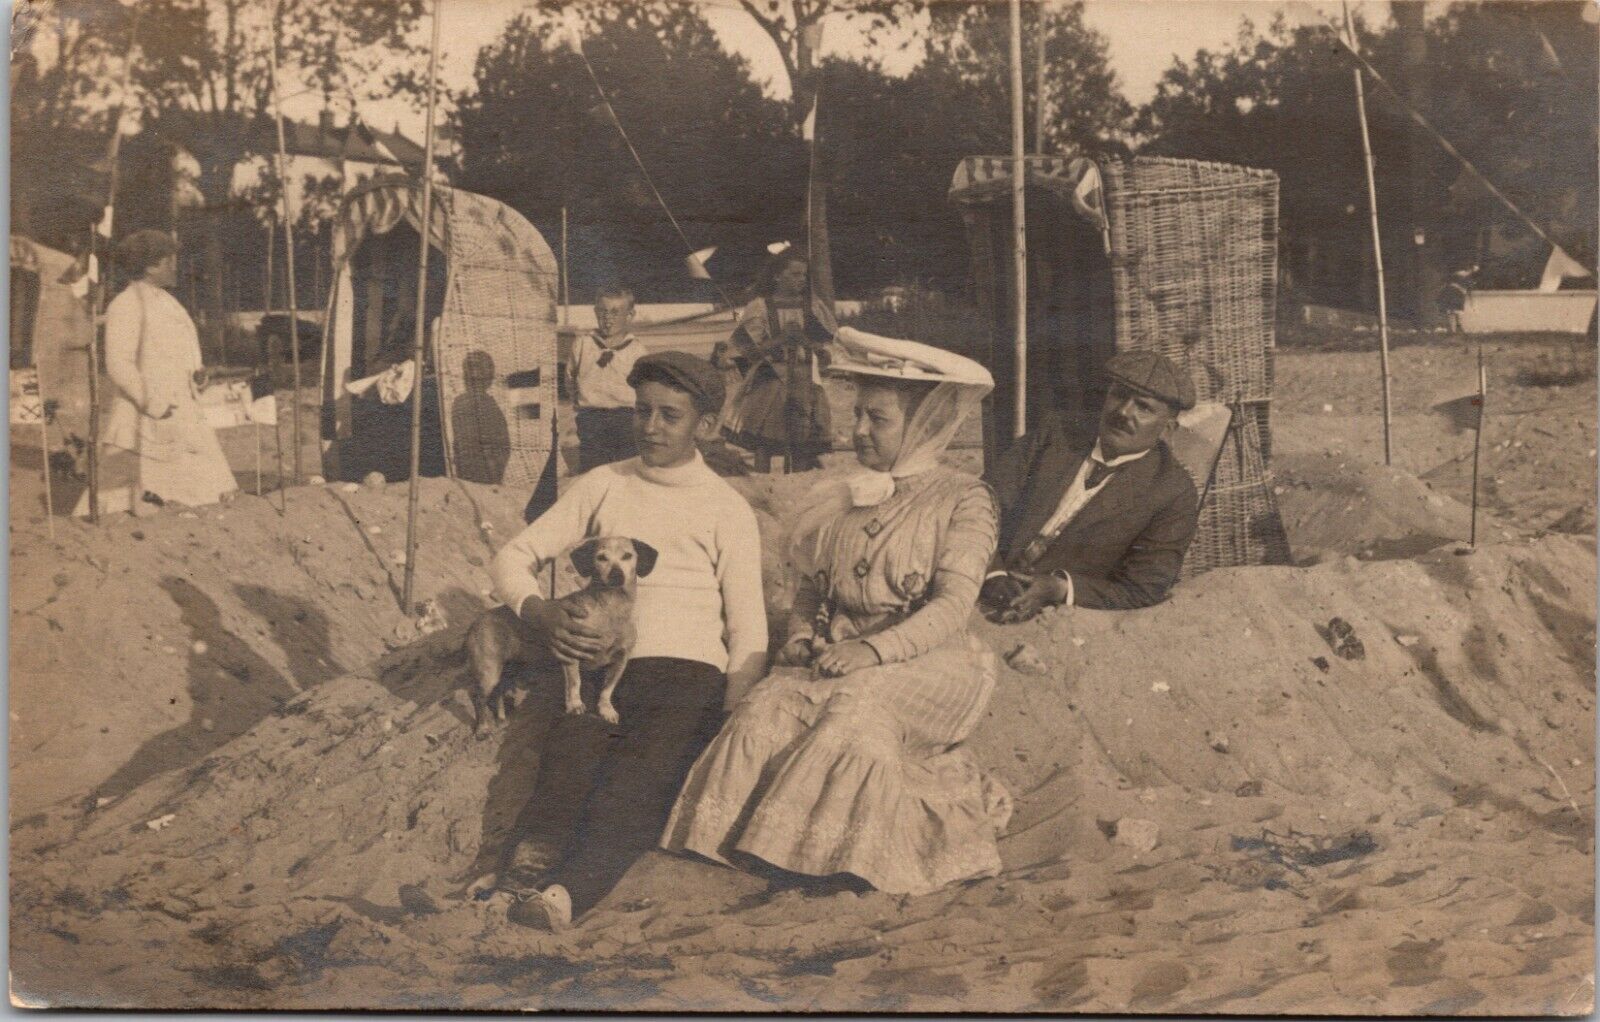 VINTAGE 1911 RPPC- FAMILY WITH SMALL DOG ON BEACH-LAKE IN VINTAGE DRESS